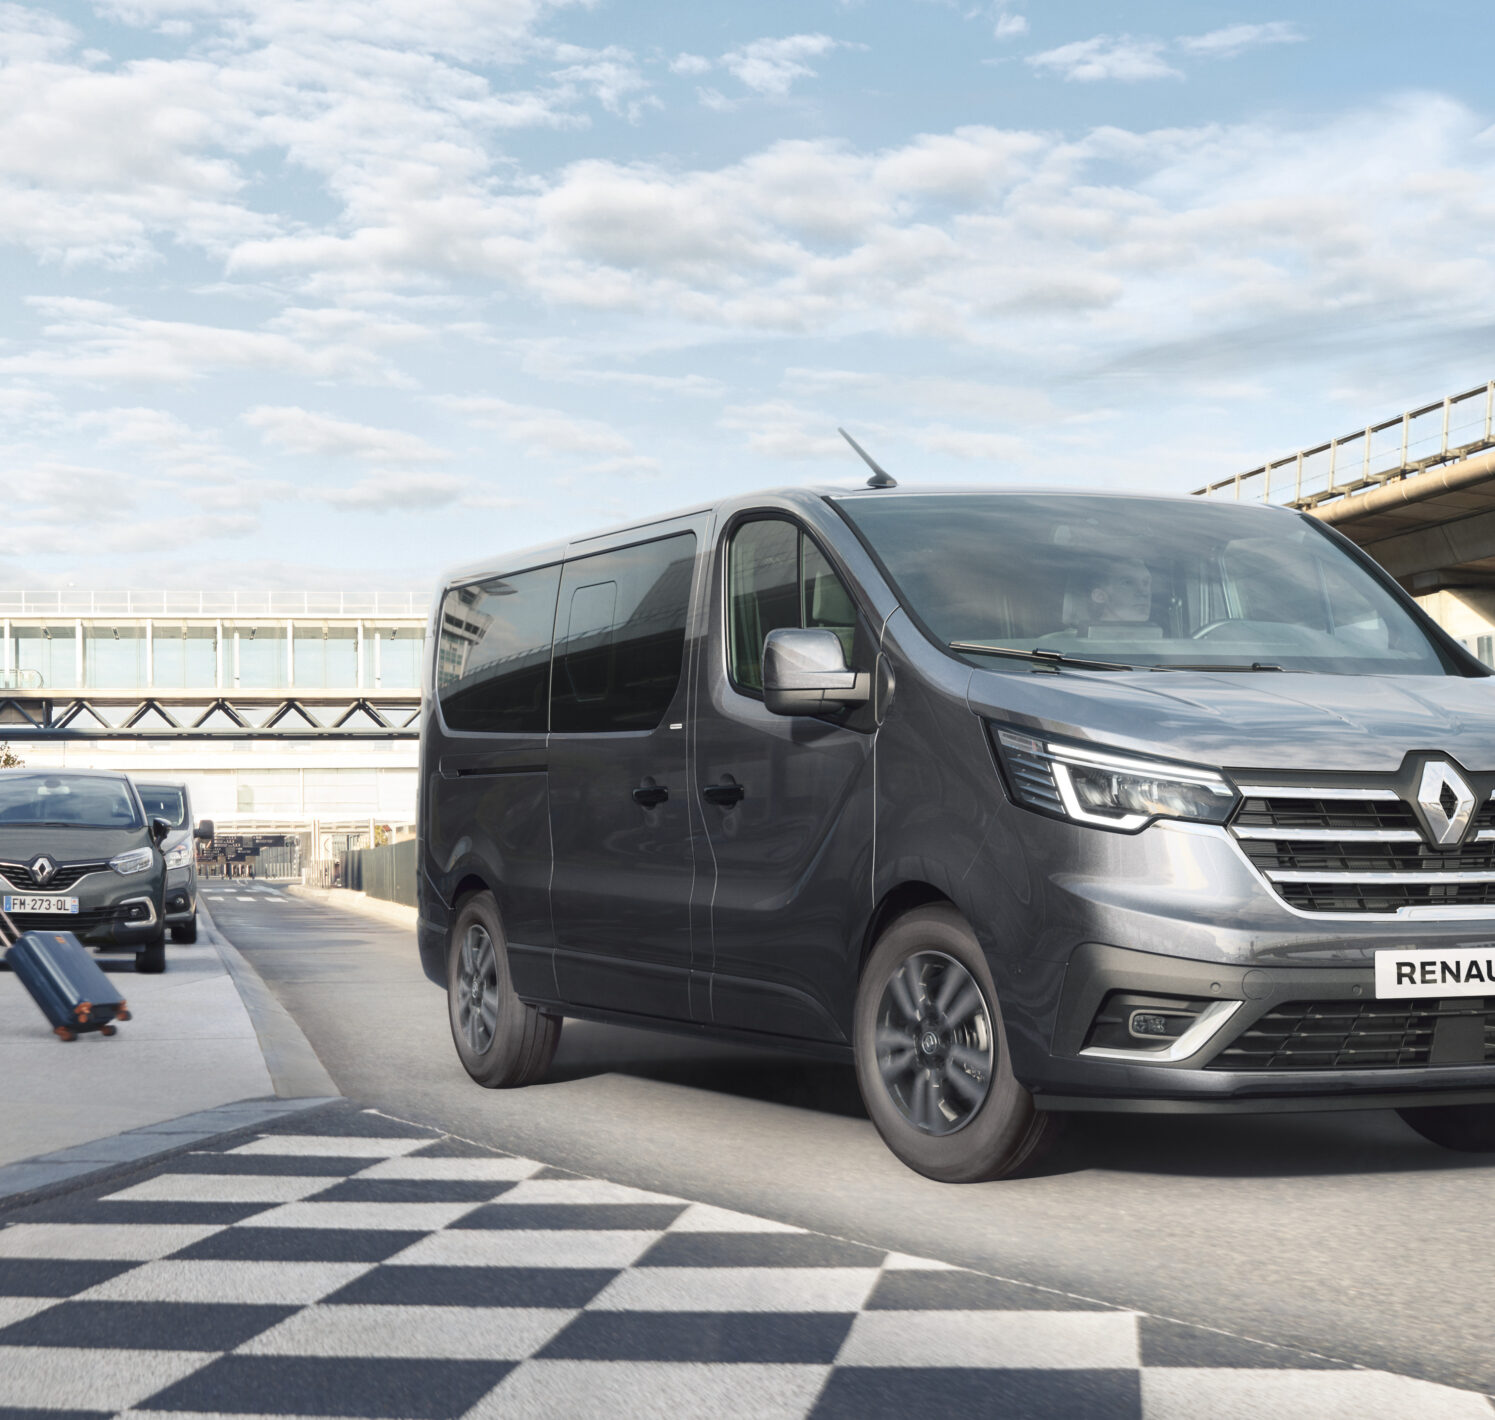 https://autofilter.sk/assets/images/trafic-combi/gallery/2020-New-Renault-Trafic-SpaceClass.jpg - obrazok